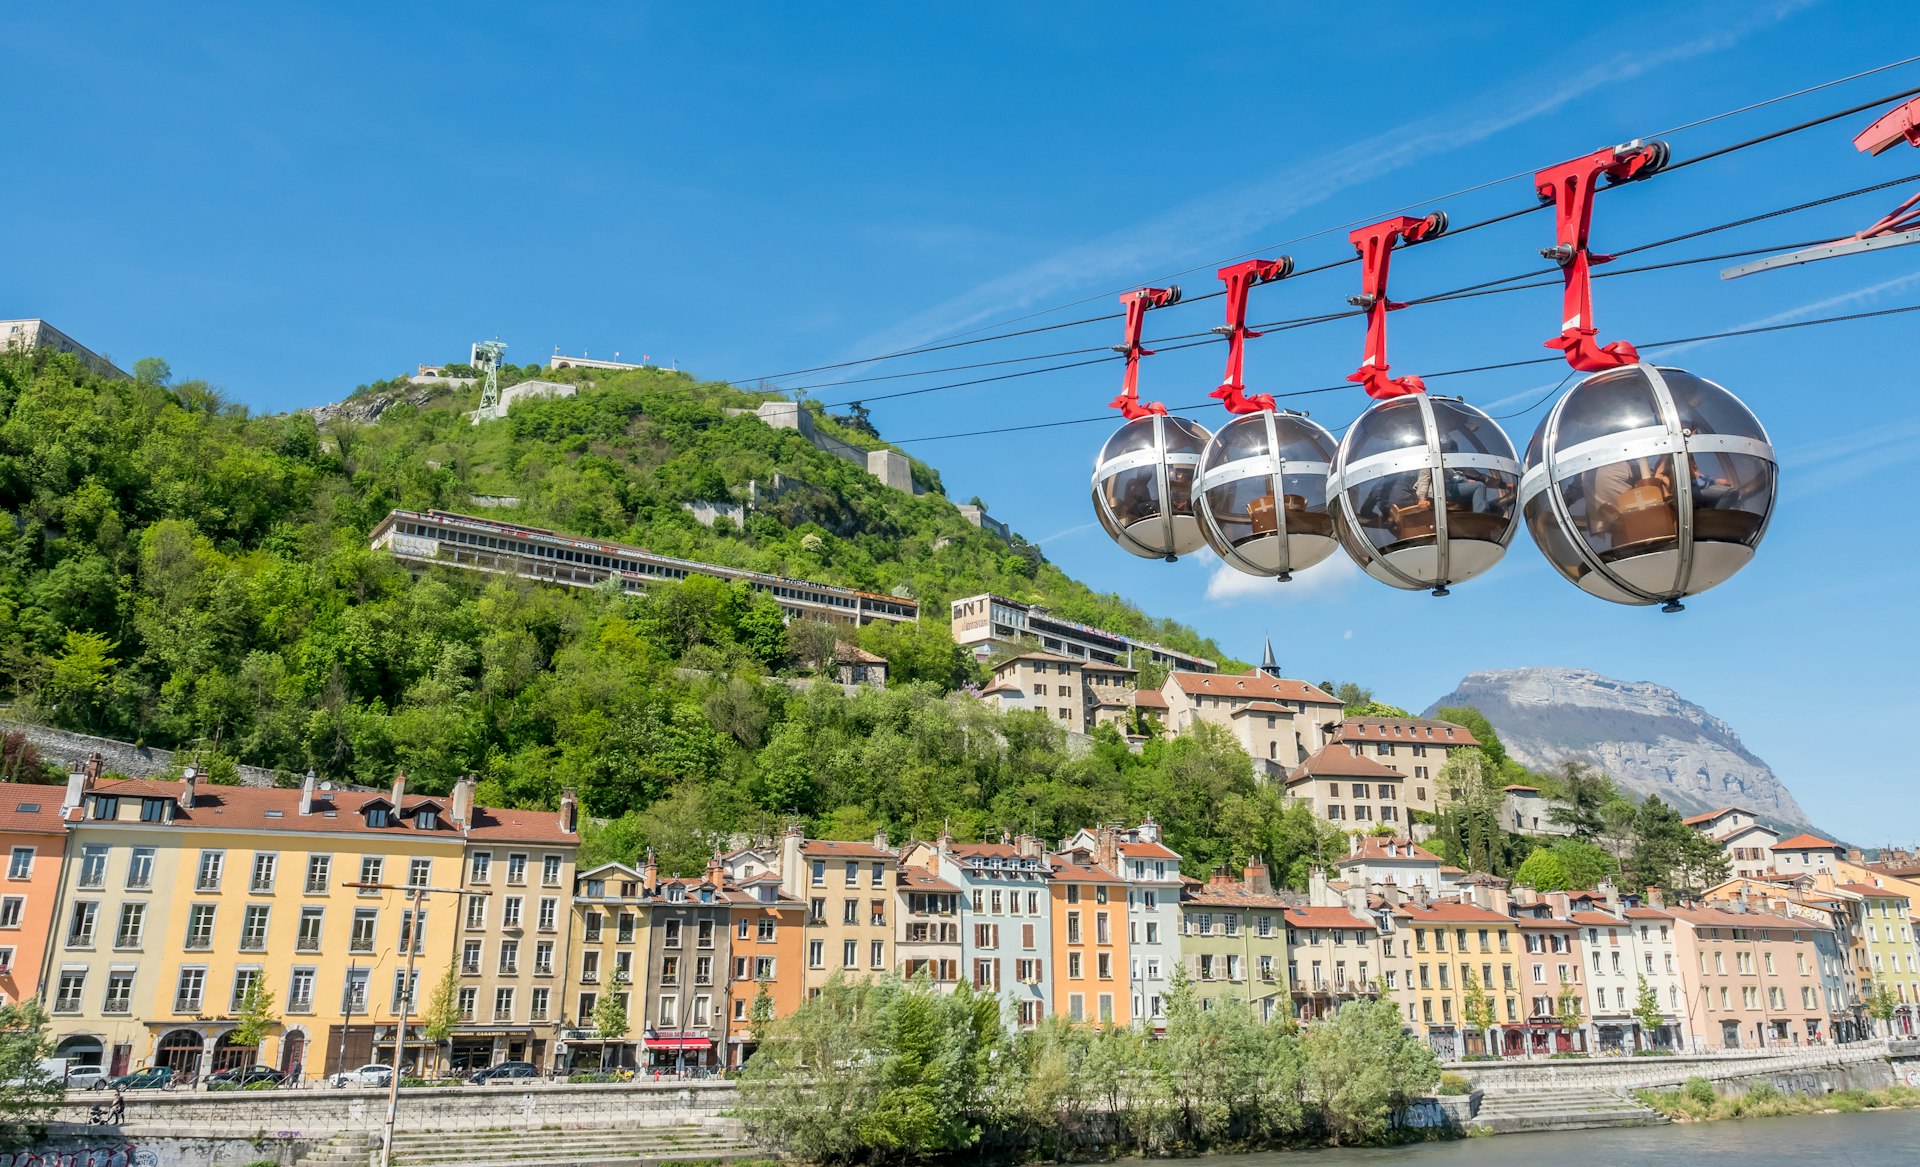 Grenoble-Bastille cable car crossing the Isere river in Grenoble.